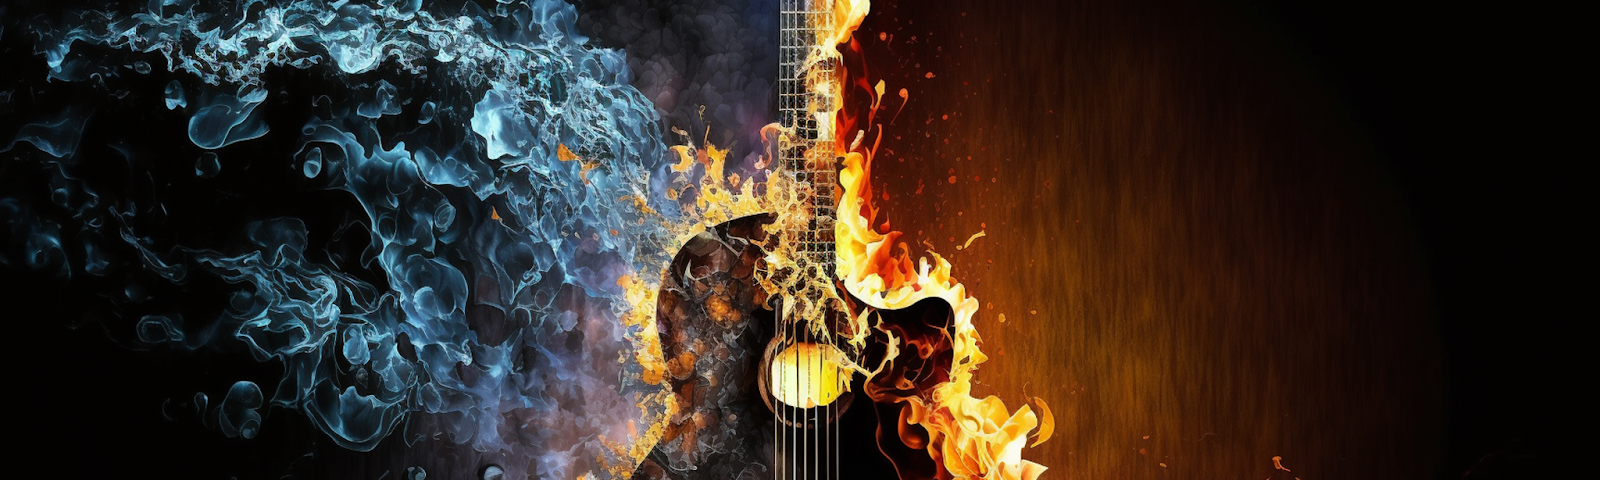 Image of a guitar on fire, one side burns orange and the other side has blue flames